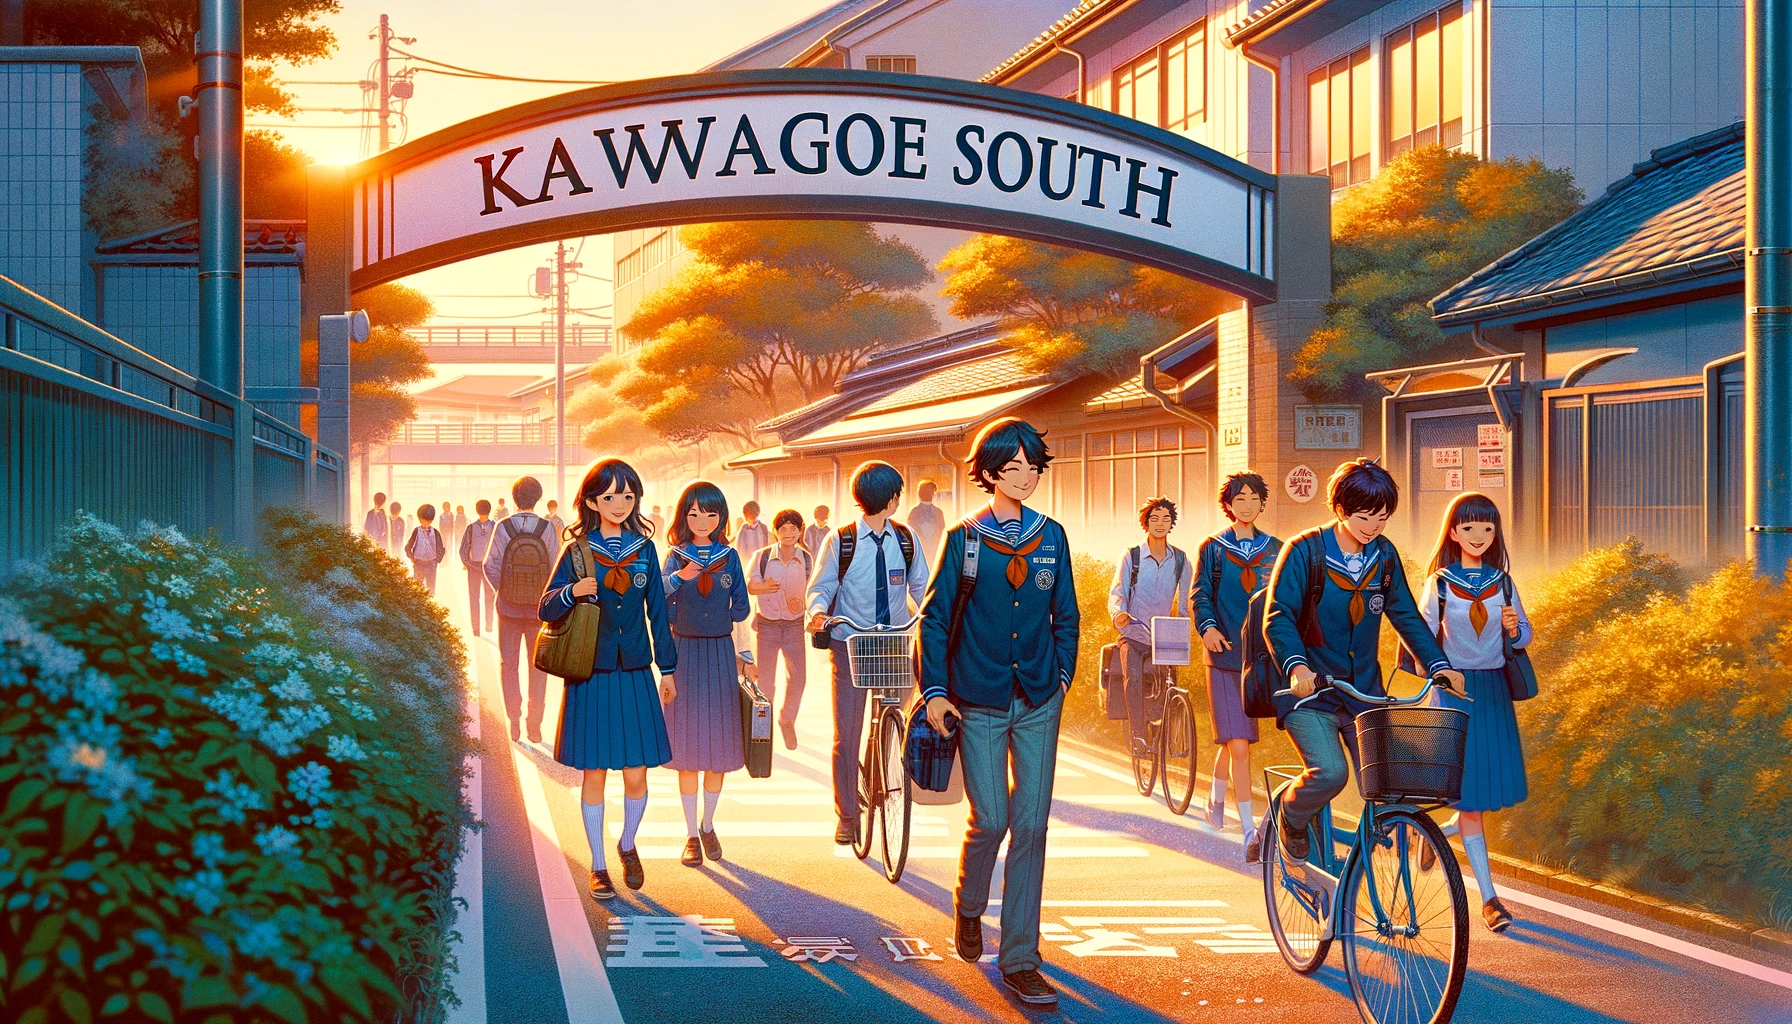 A vibrant morning scene at Kawagoe South University featuring students commuting to school. The image captures students walking and biking along a scenic path that leads to the school entrance. The students are chatting happily, some riding bicycles, others walking in groups or alone, all dressed in the school's distinct uniform. The background shows the school’s facade, bathed in morning light, creating a welcoming atmosphere. The words 'KAWAGOE SOUTH' are prominently displayed, emphasizing the school's strong sense of community and academic pride.